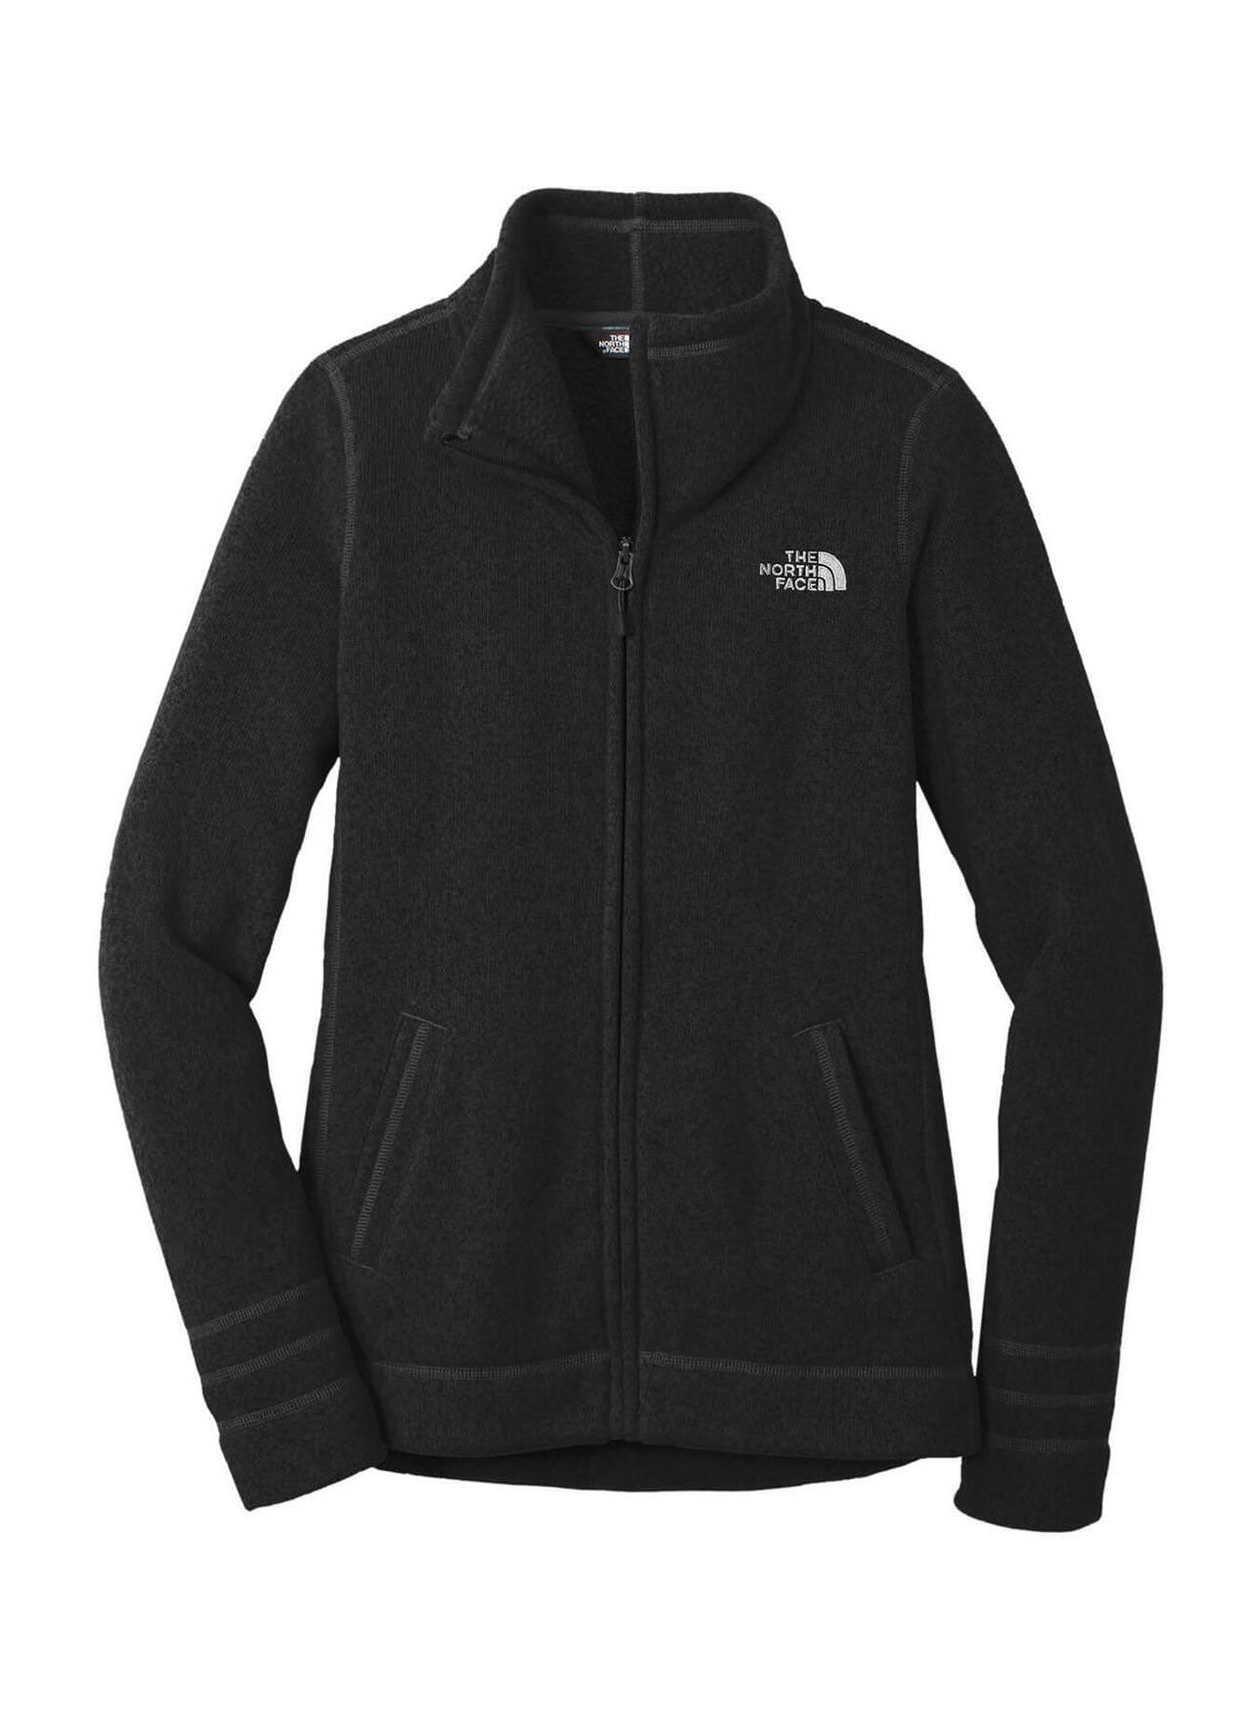 Custom Jackets  Corporate The North Face Women's Black Heather